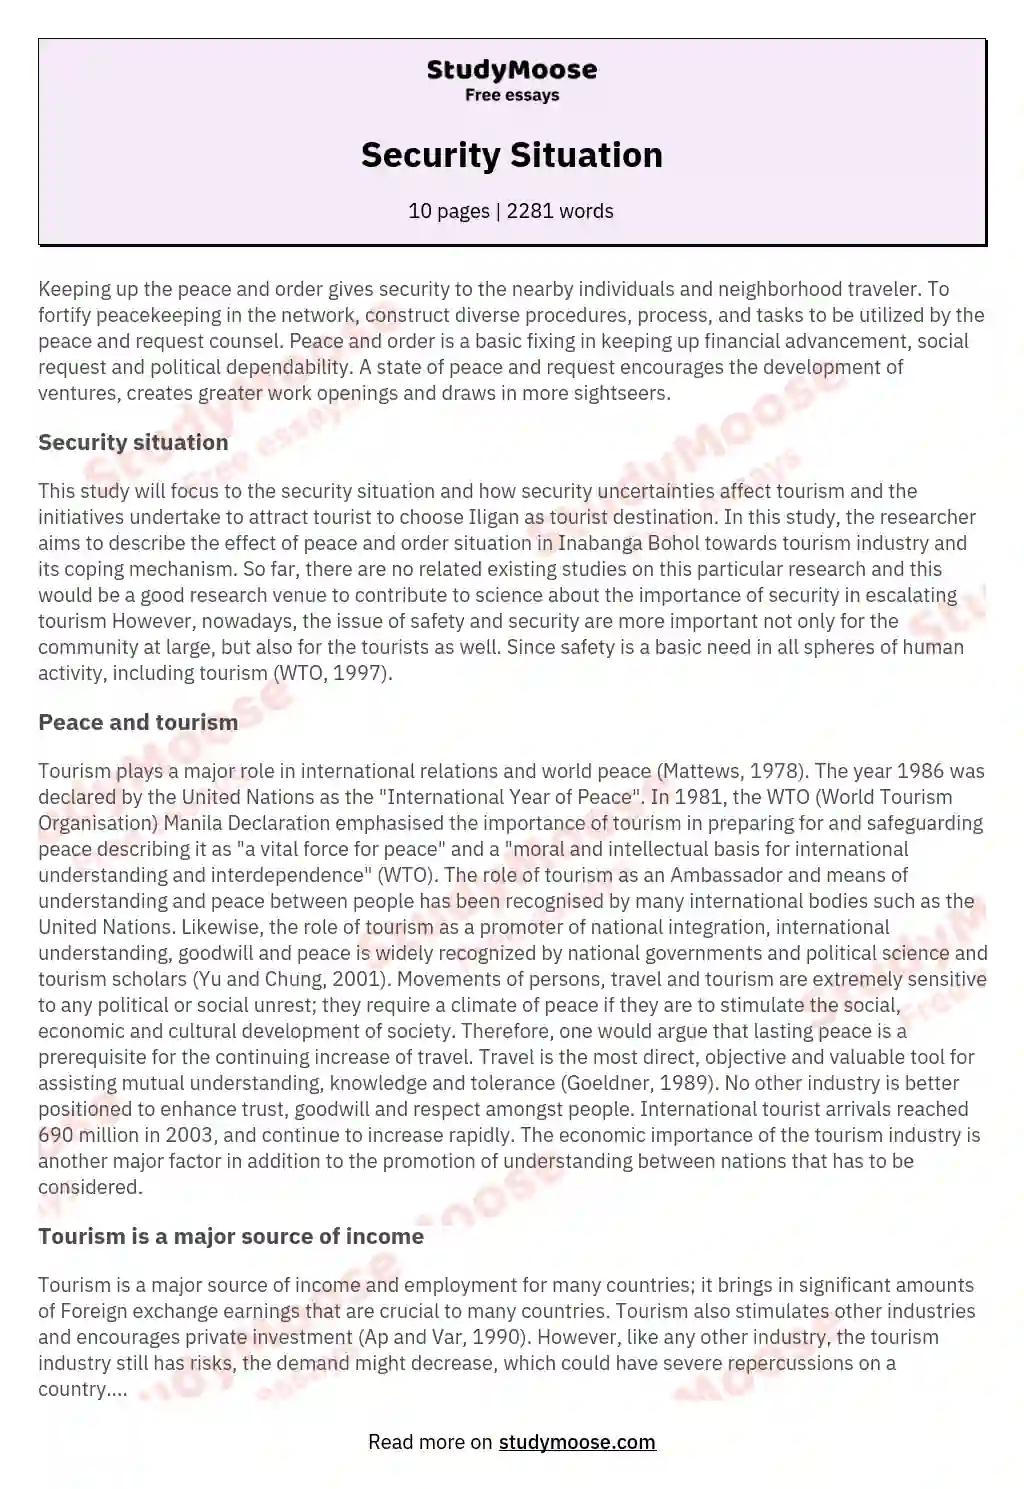 Security Situation essay